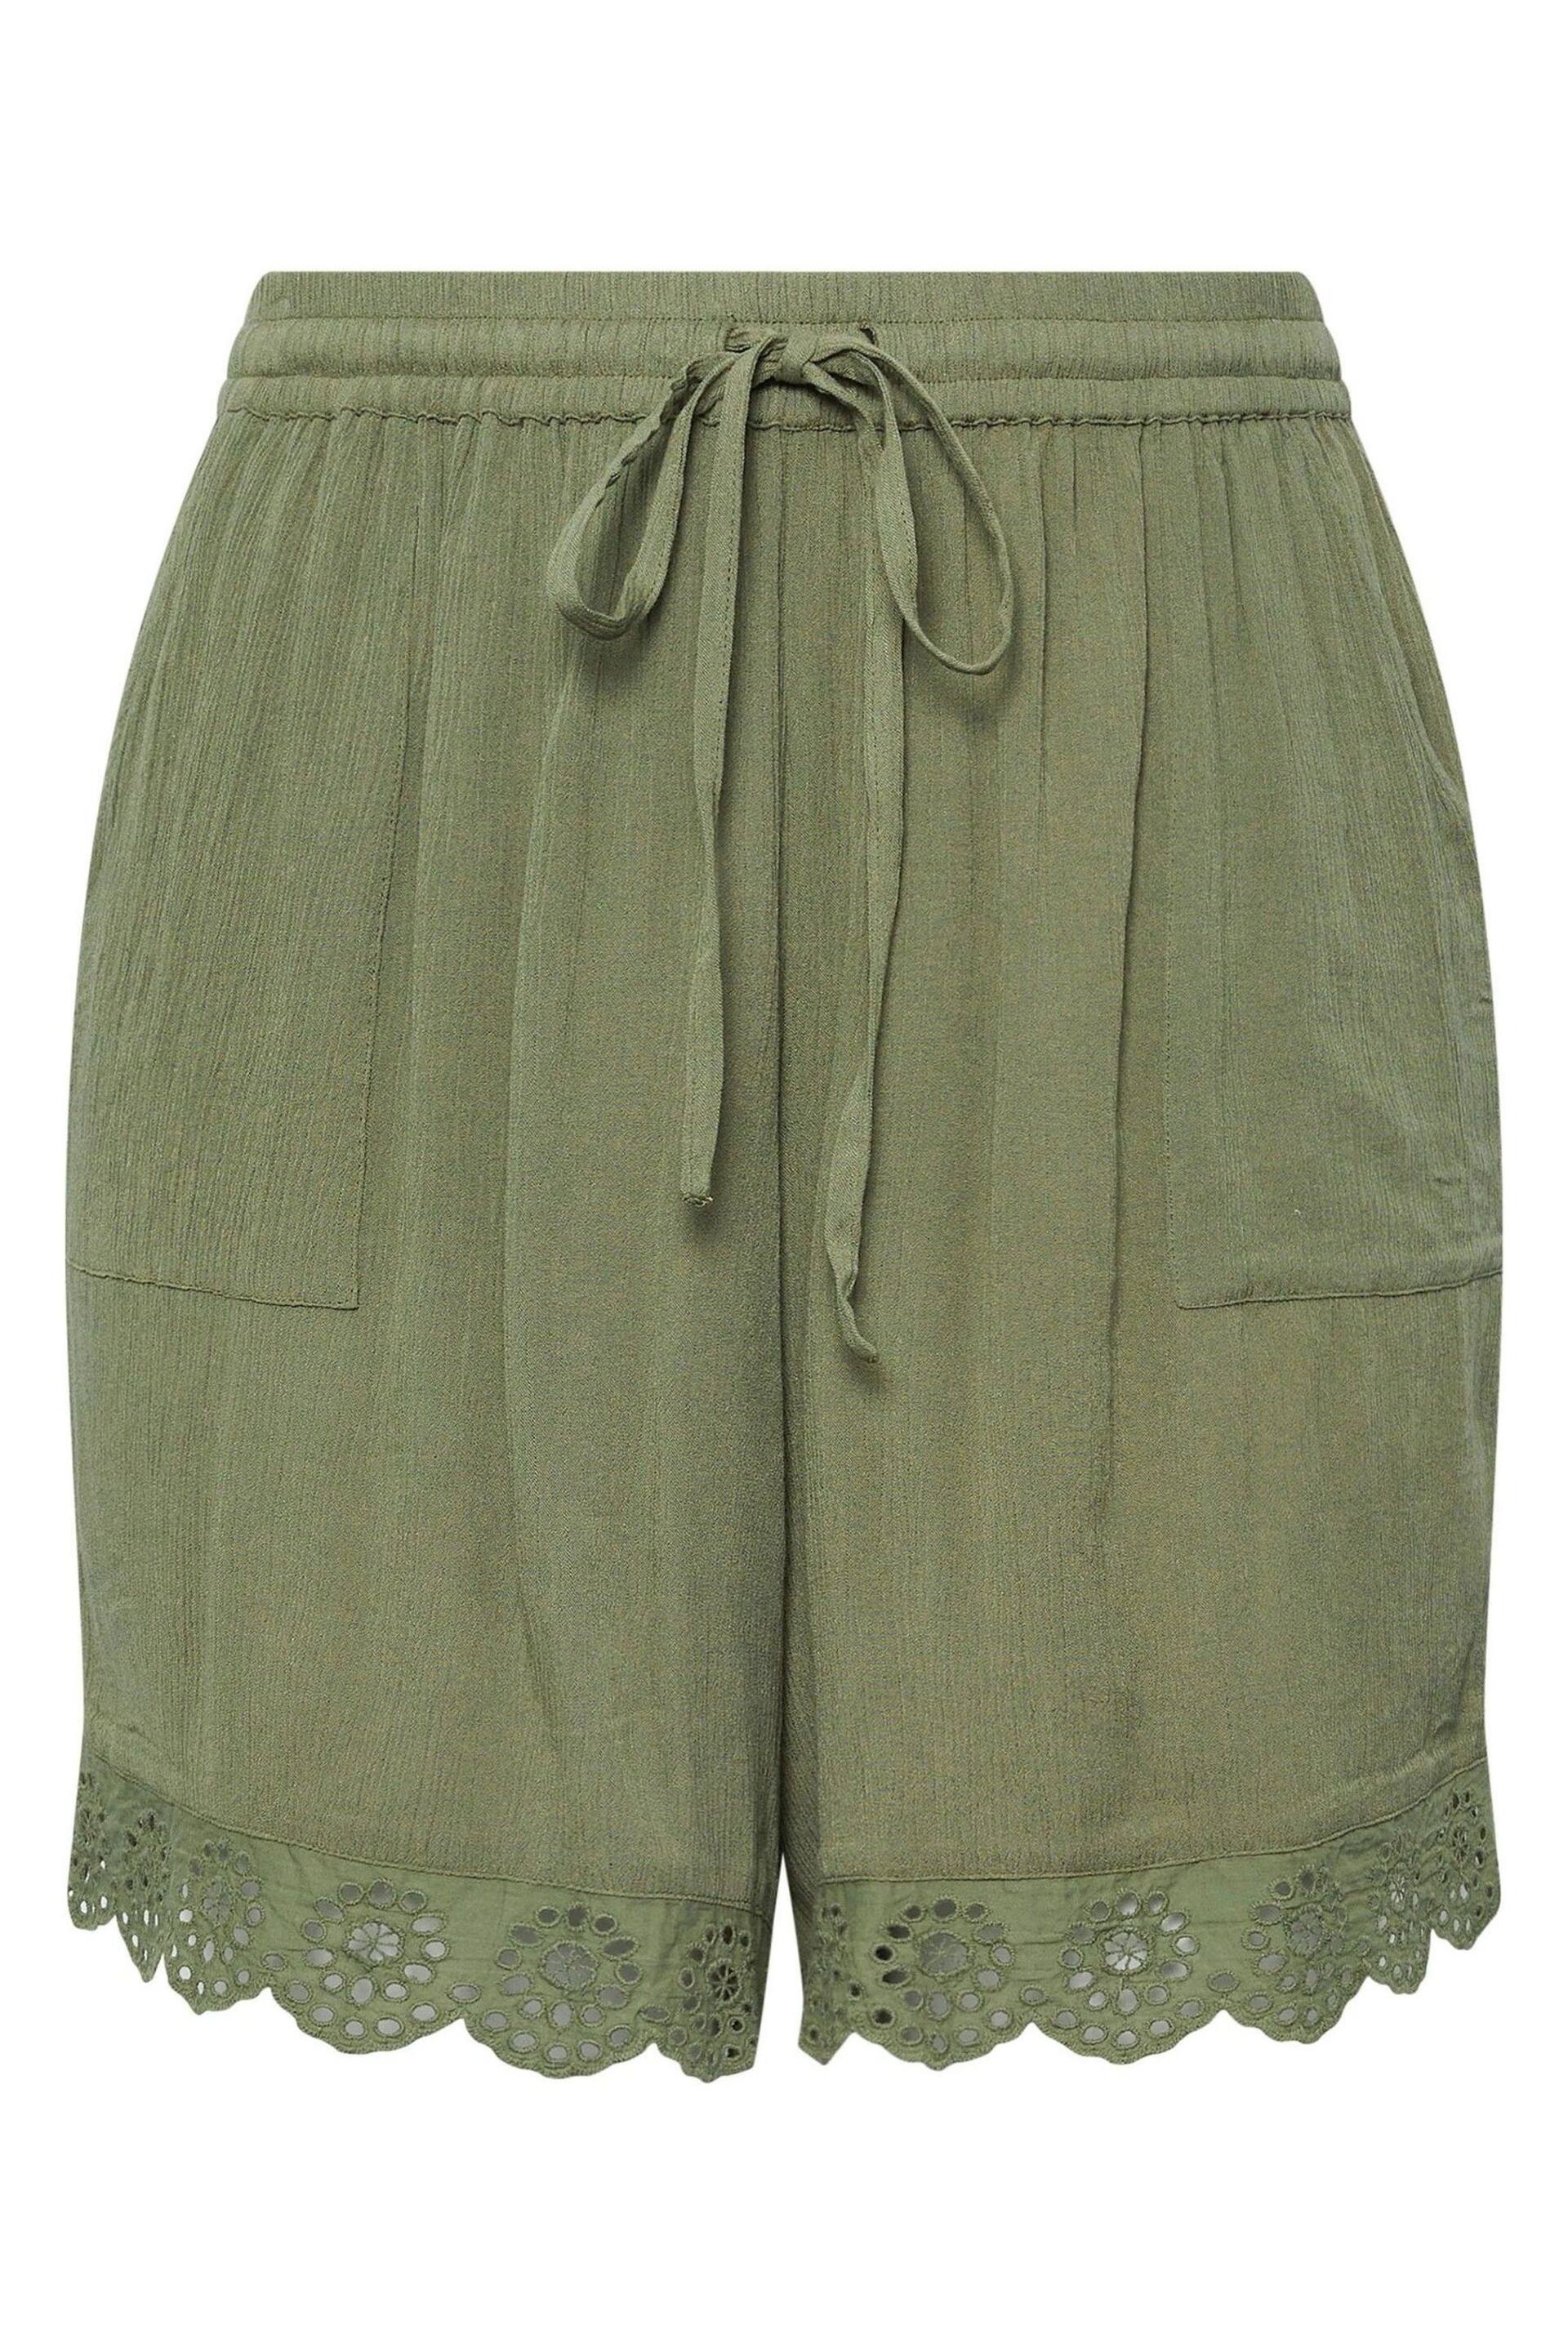 Yours Curve Green Broderie Anglaise Scalloped Shorts - Image 5 of 5